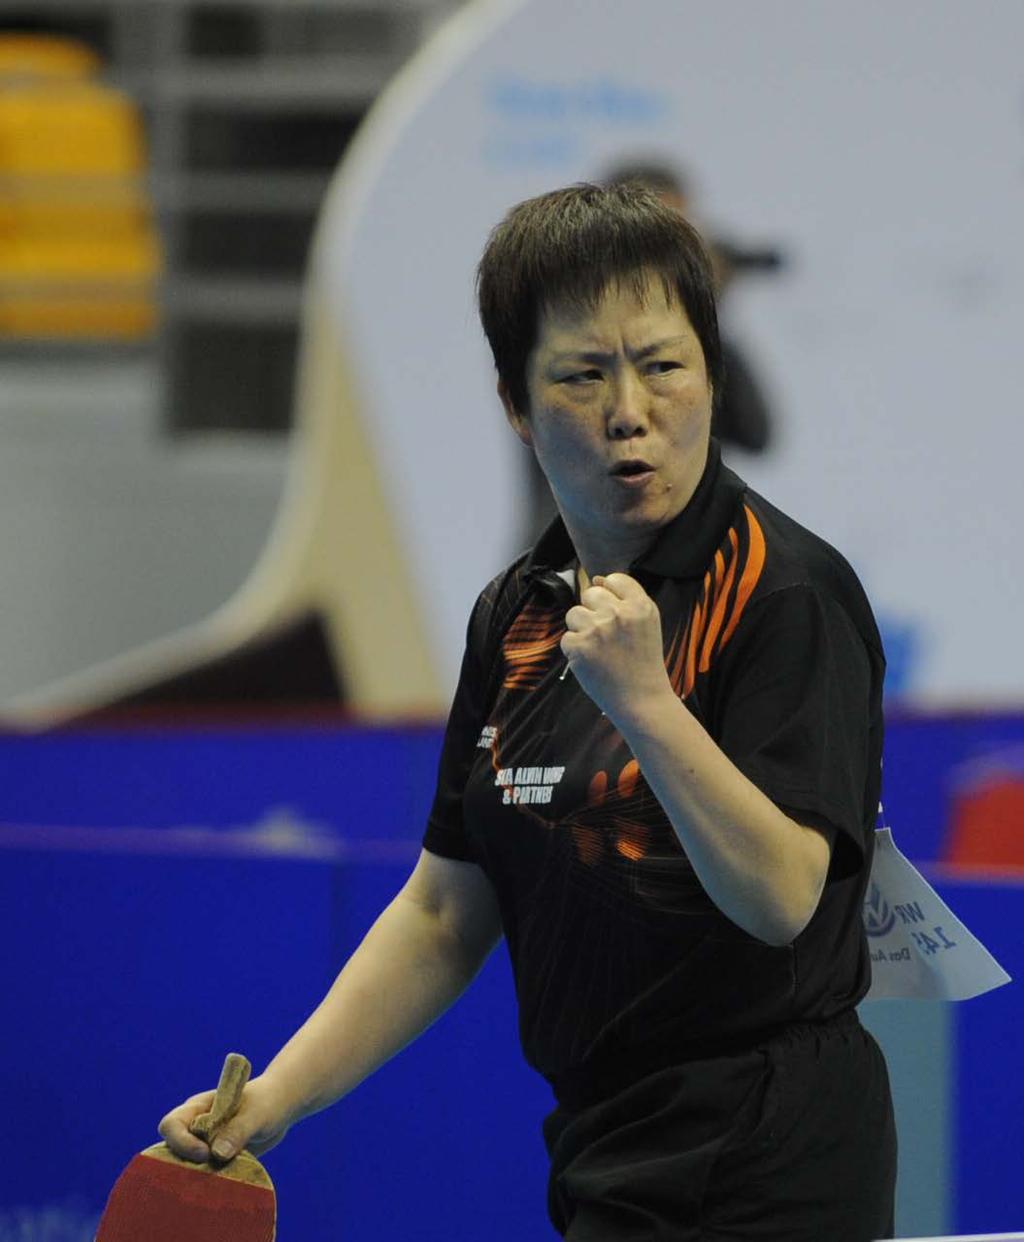 ITTF-OCEANIA EVENTS EVENT 2: ITTF- OCEANIA CHAMPIONSHIPS QUALIFICATION FOR THE ITTF WORLD TEAM CUP The ITTF-Oceania Championships consists of Teams and Individual events.